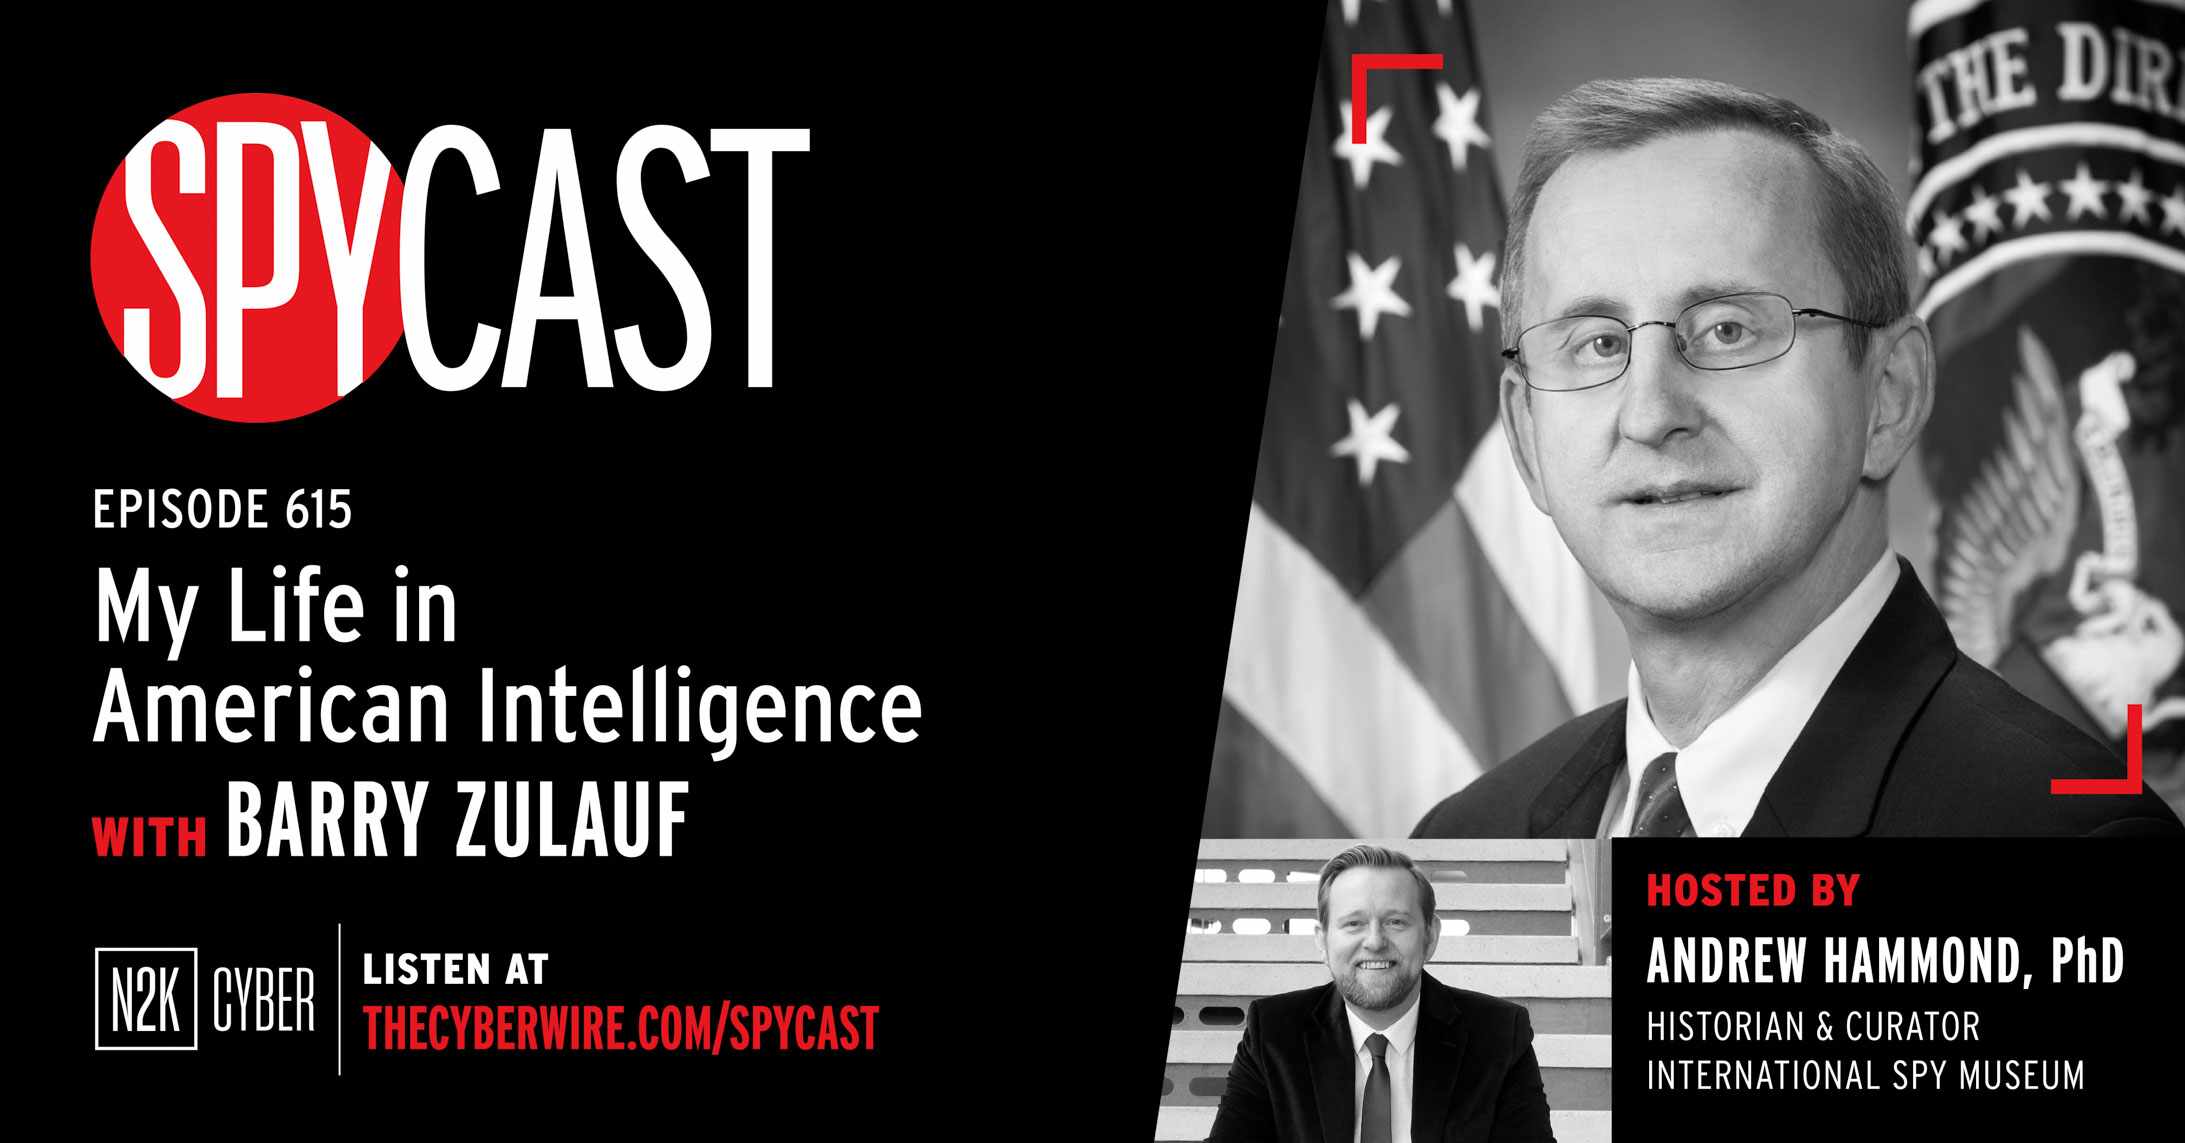 “My Life in American Intelligence” – with Barry Zulauf